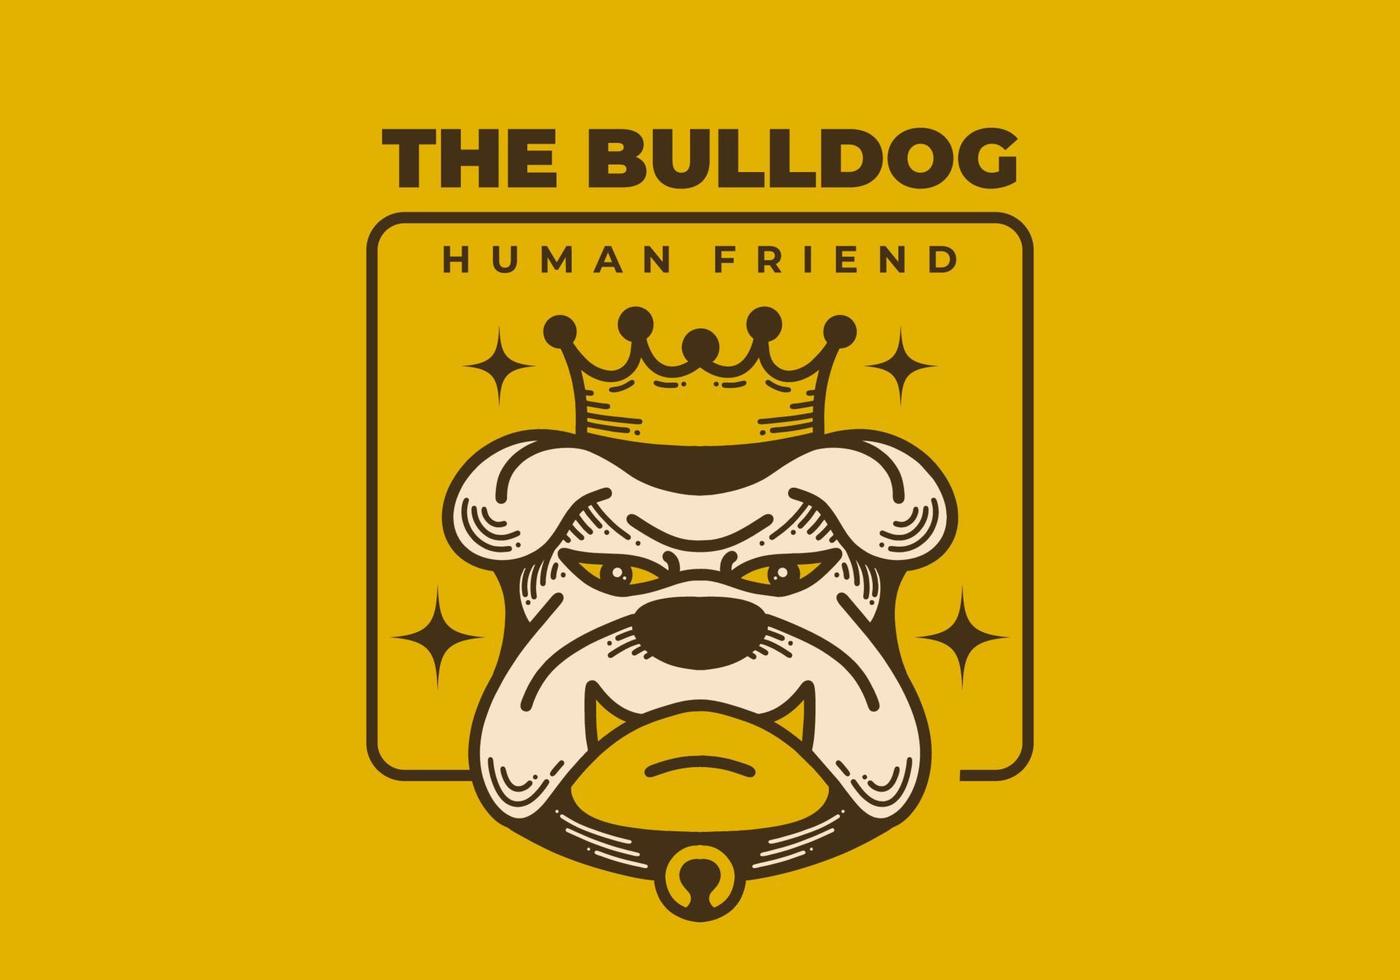 Retro art illustration of a angry bulldog face with crown vector